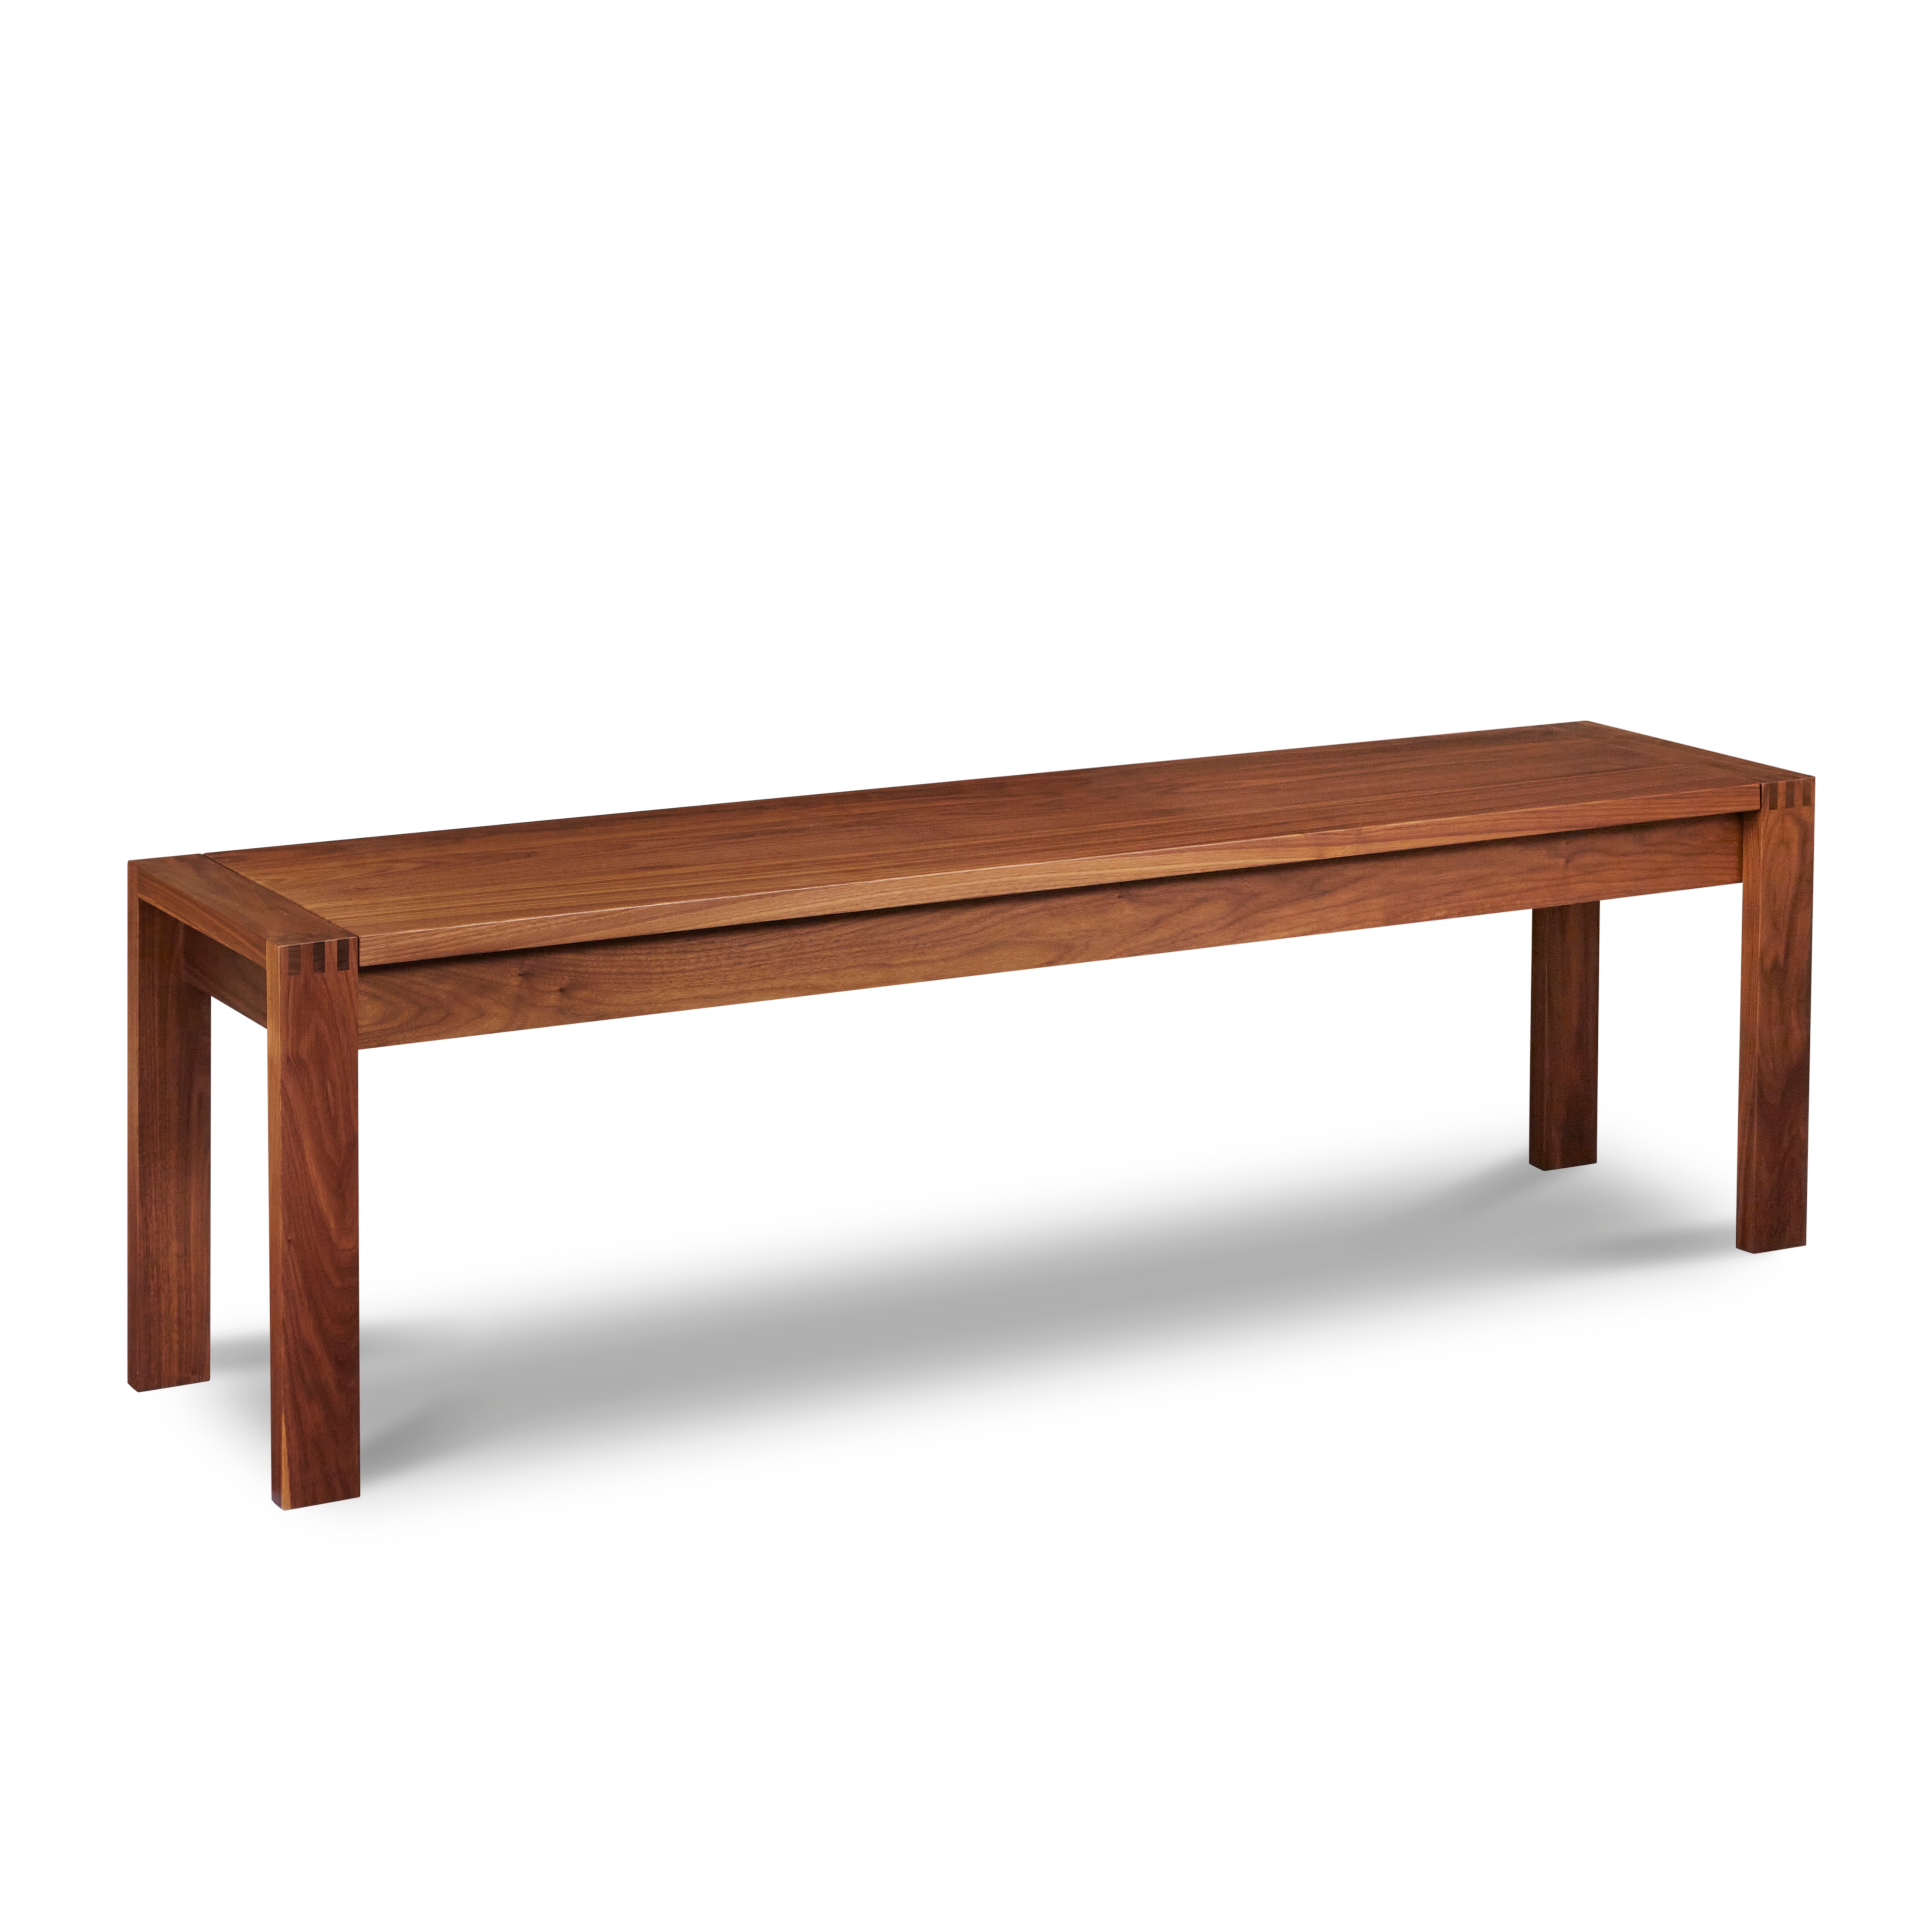 Modern Harbor bench for in walnut from Chilton Furniture in Maine